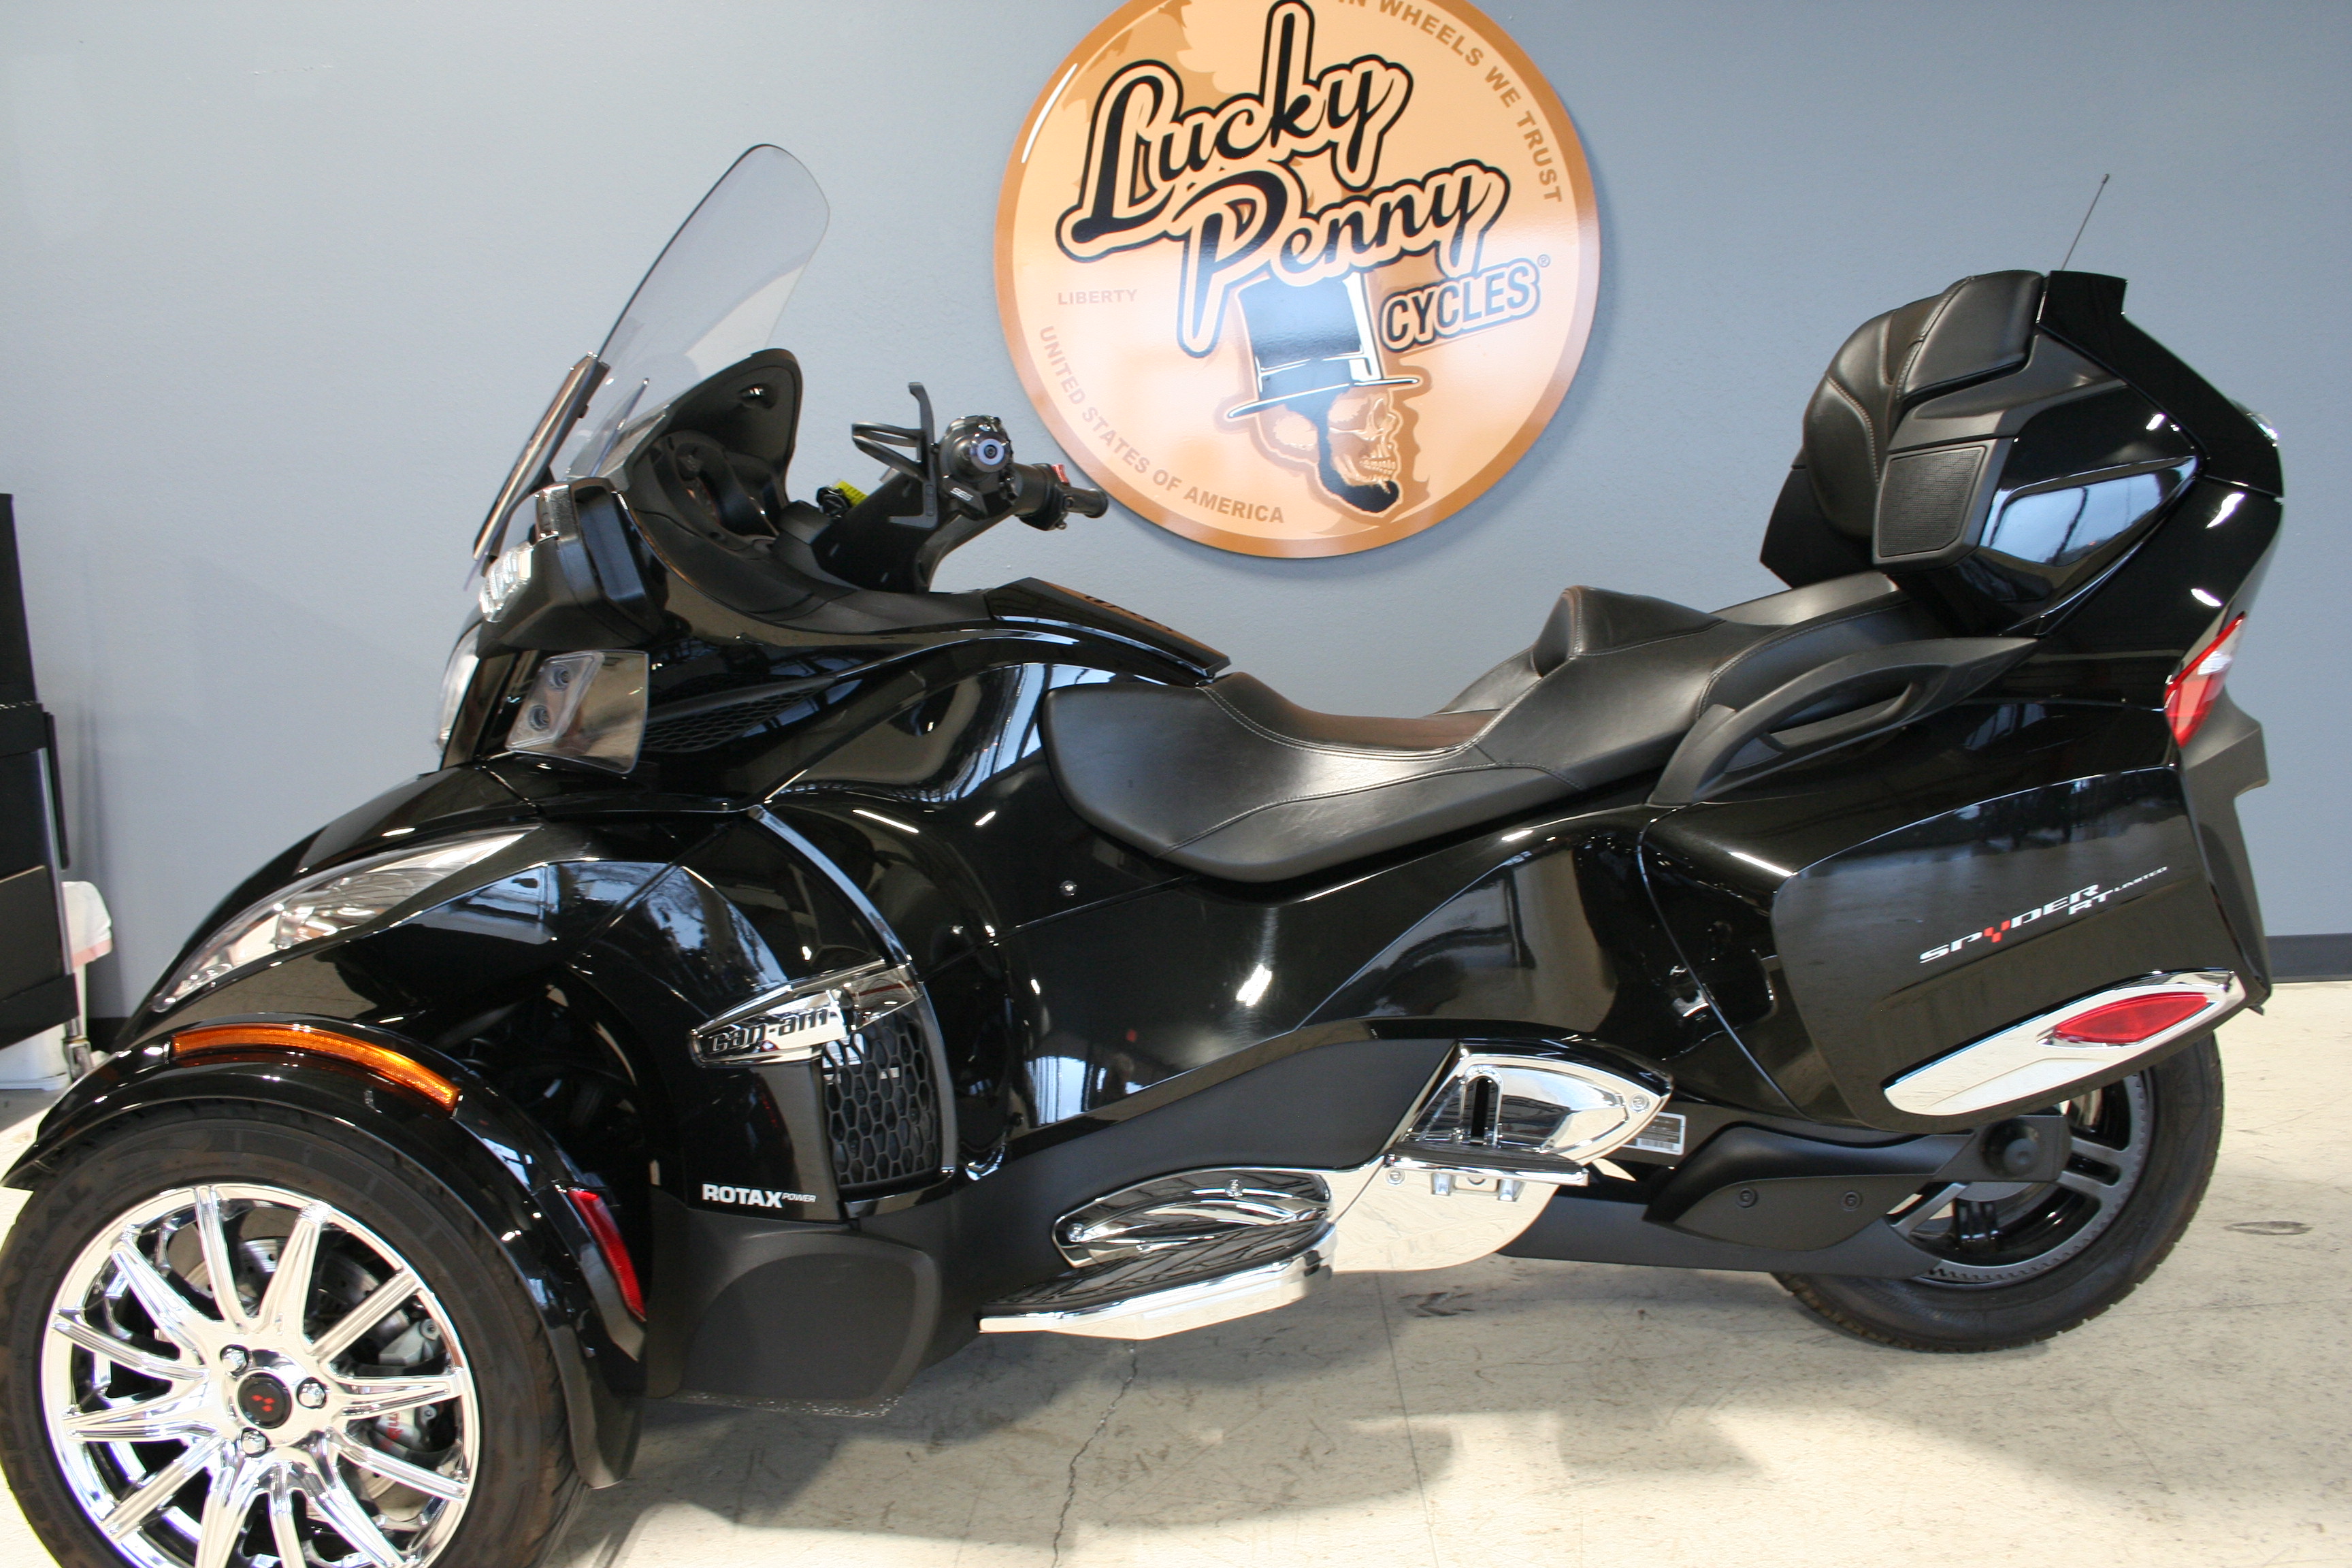 Pre-Owned 2016 Can-Am Spyder RT Limited in Bedford #GV001706 | Lucky Penny Cycles